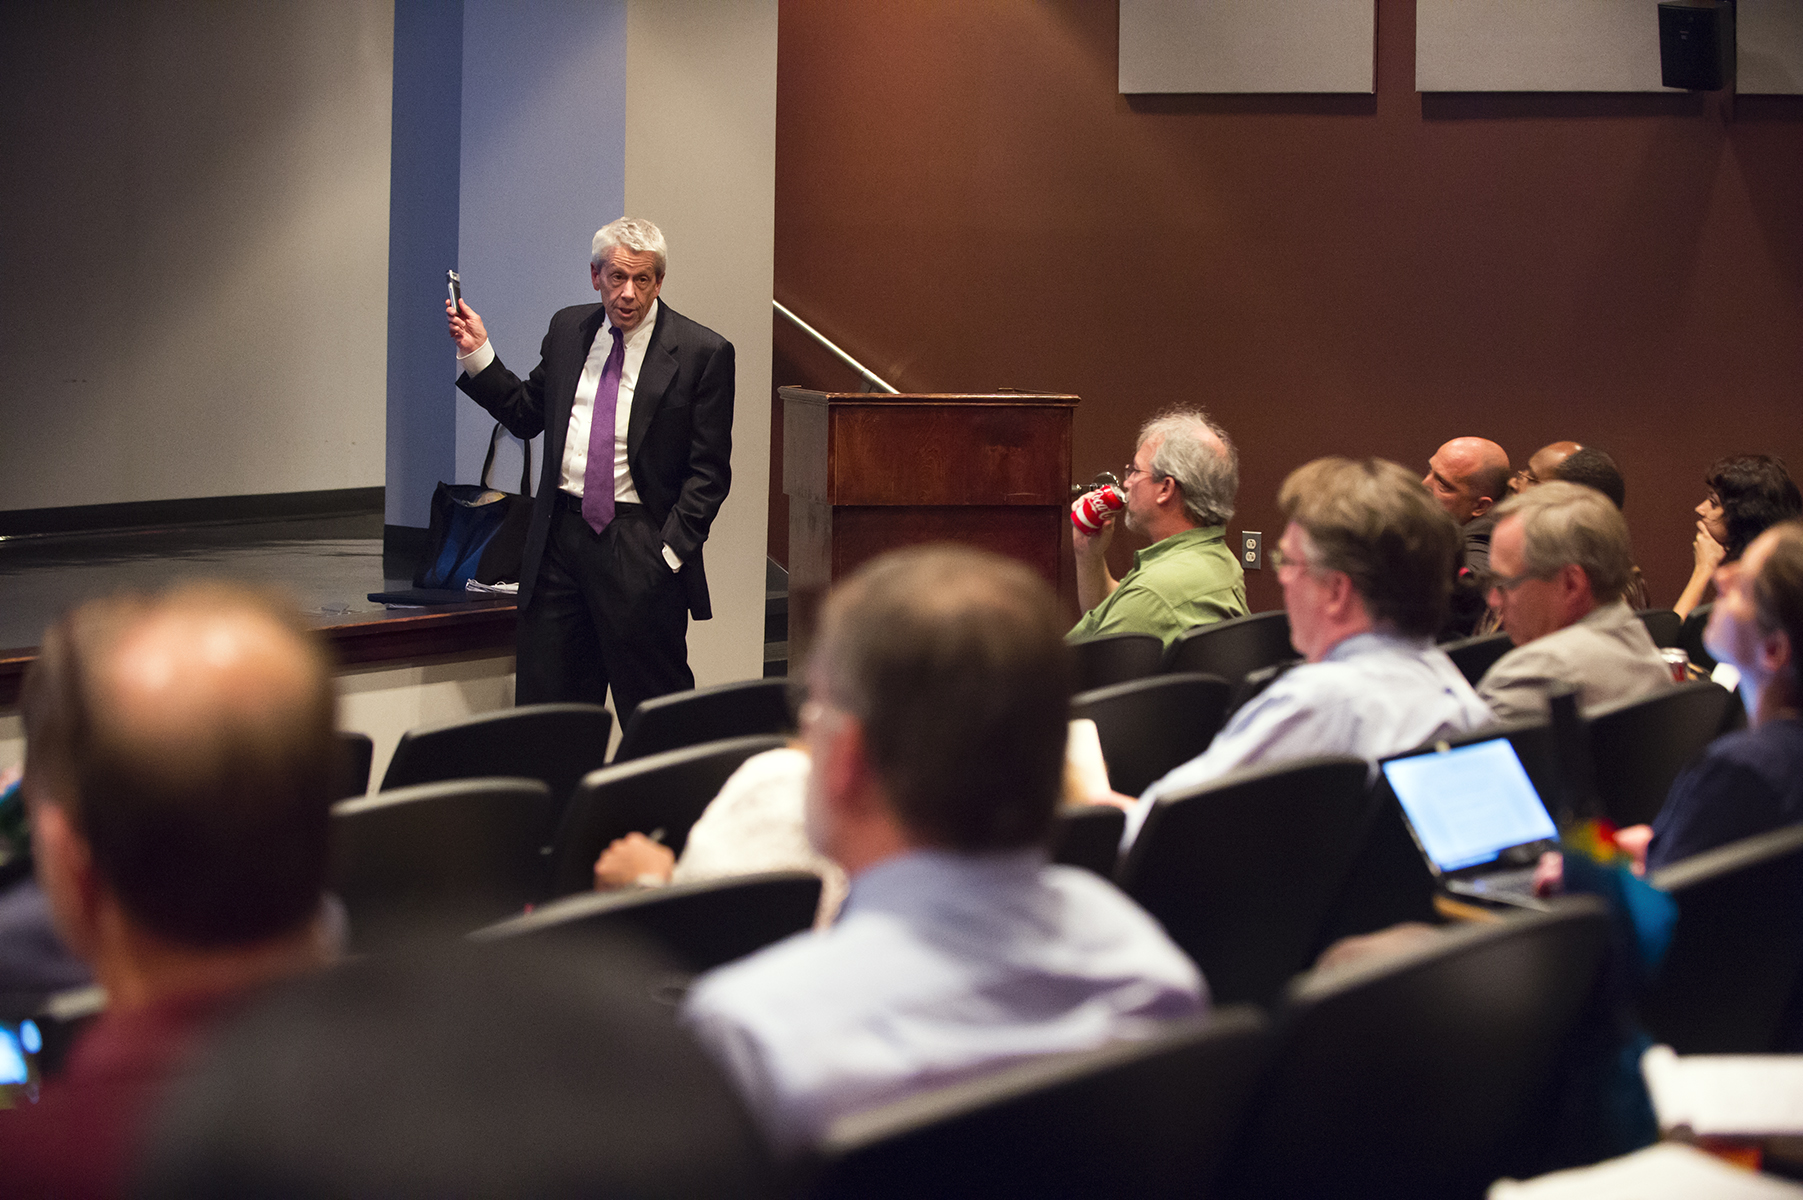 Alumnus Bill Riley returned to Mississippi State University to share information about research opportunities available through the U.S. Agency for International Development with faculty and administrators. He has been a USAID administrator for more than three decades.